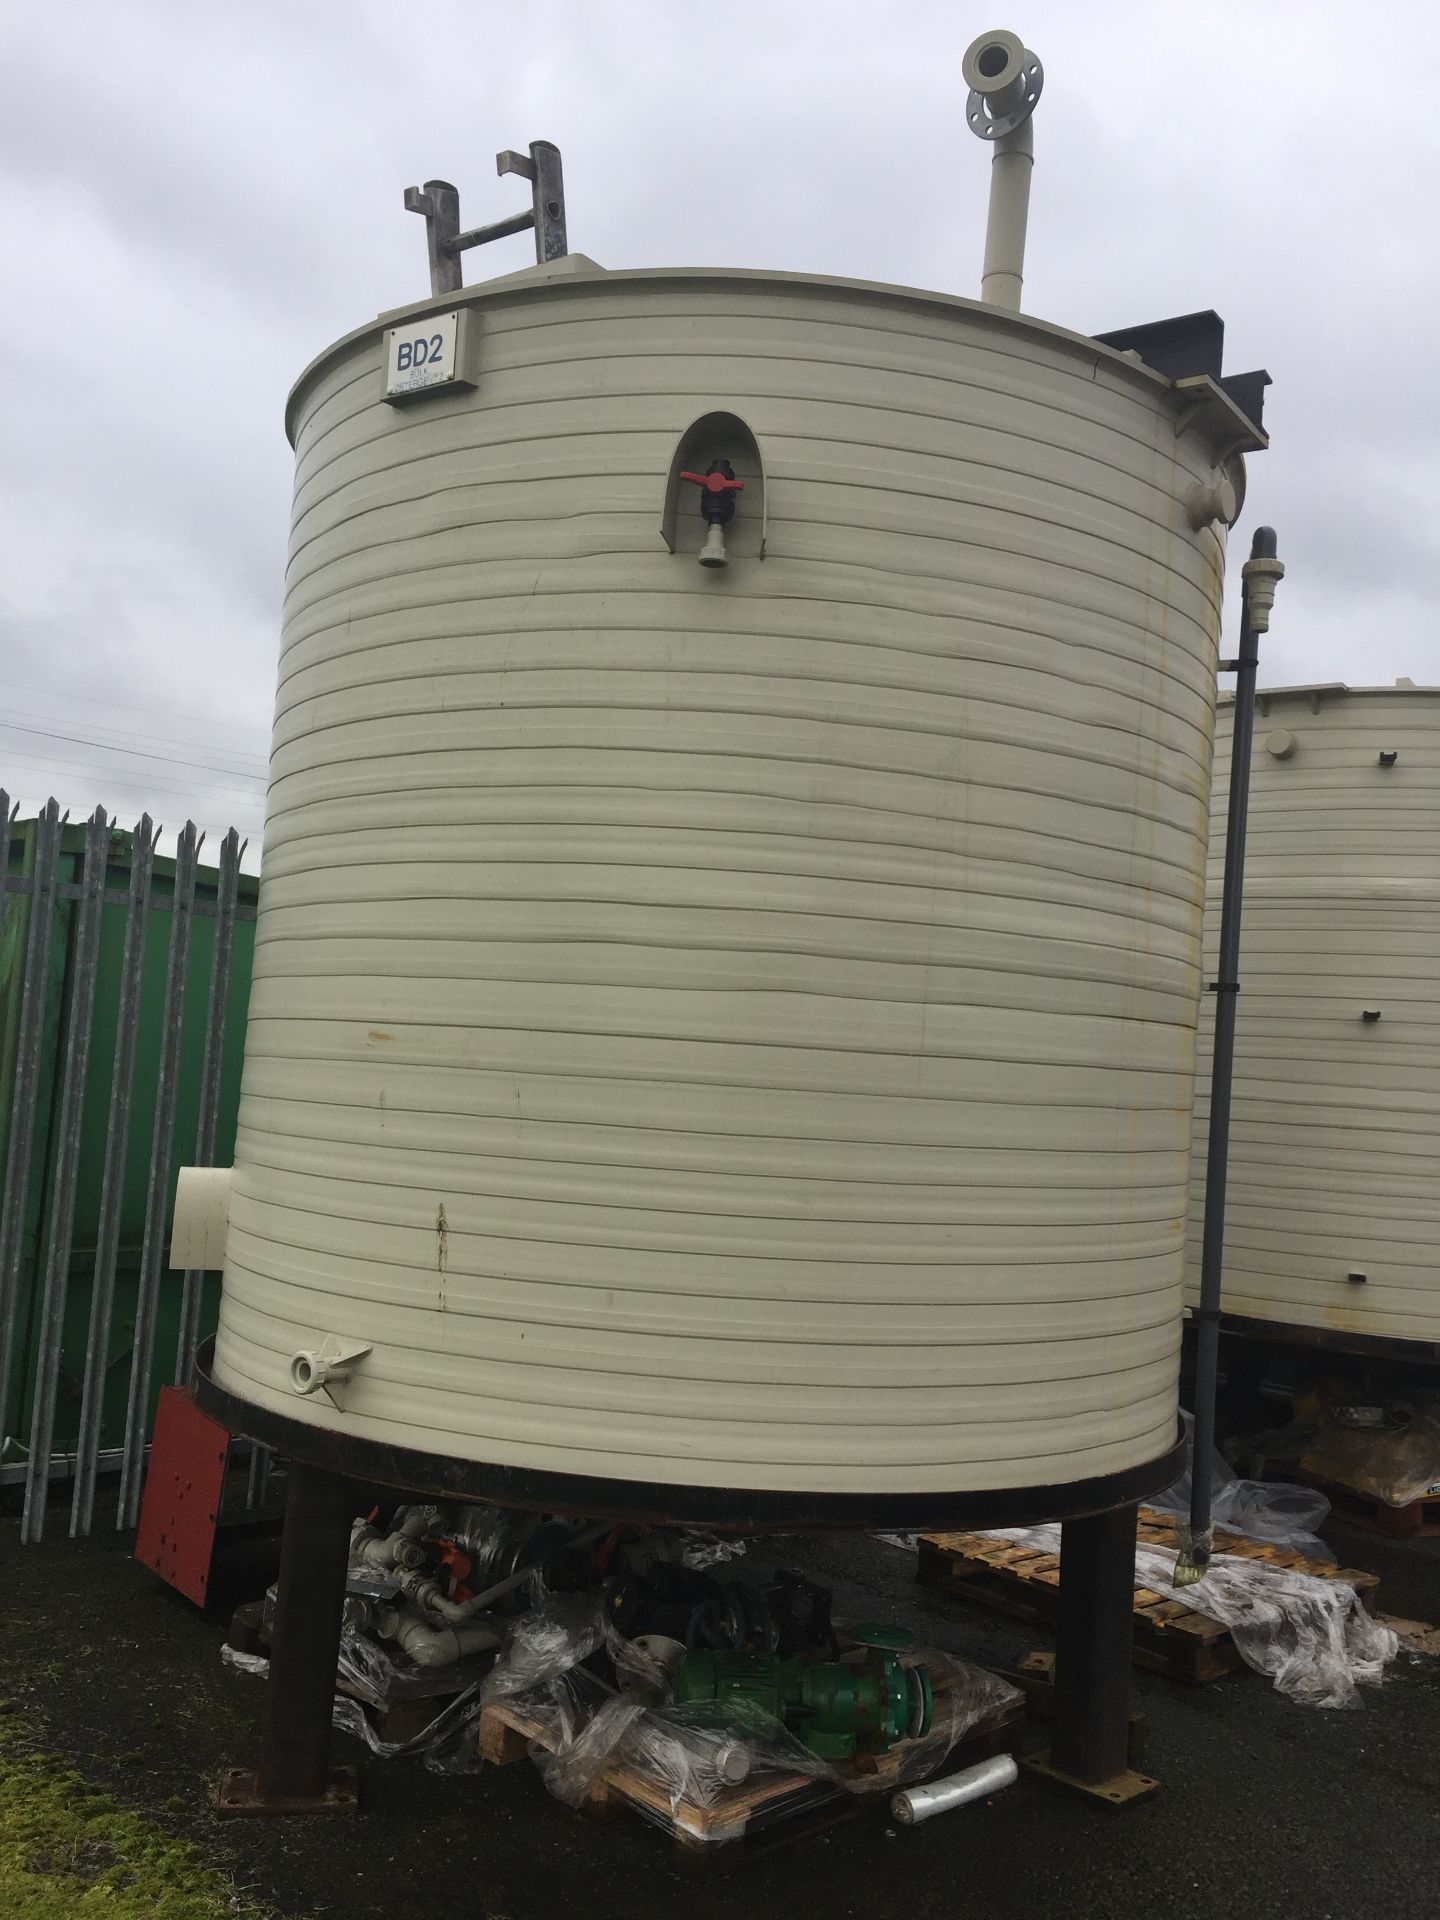 1 x BD2 12,000 Litre Polypropylene Chem Resist Tank - Location: Oldham Has been used for detergent